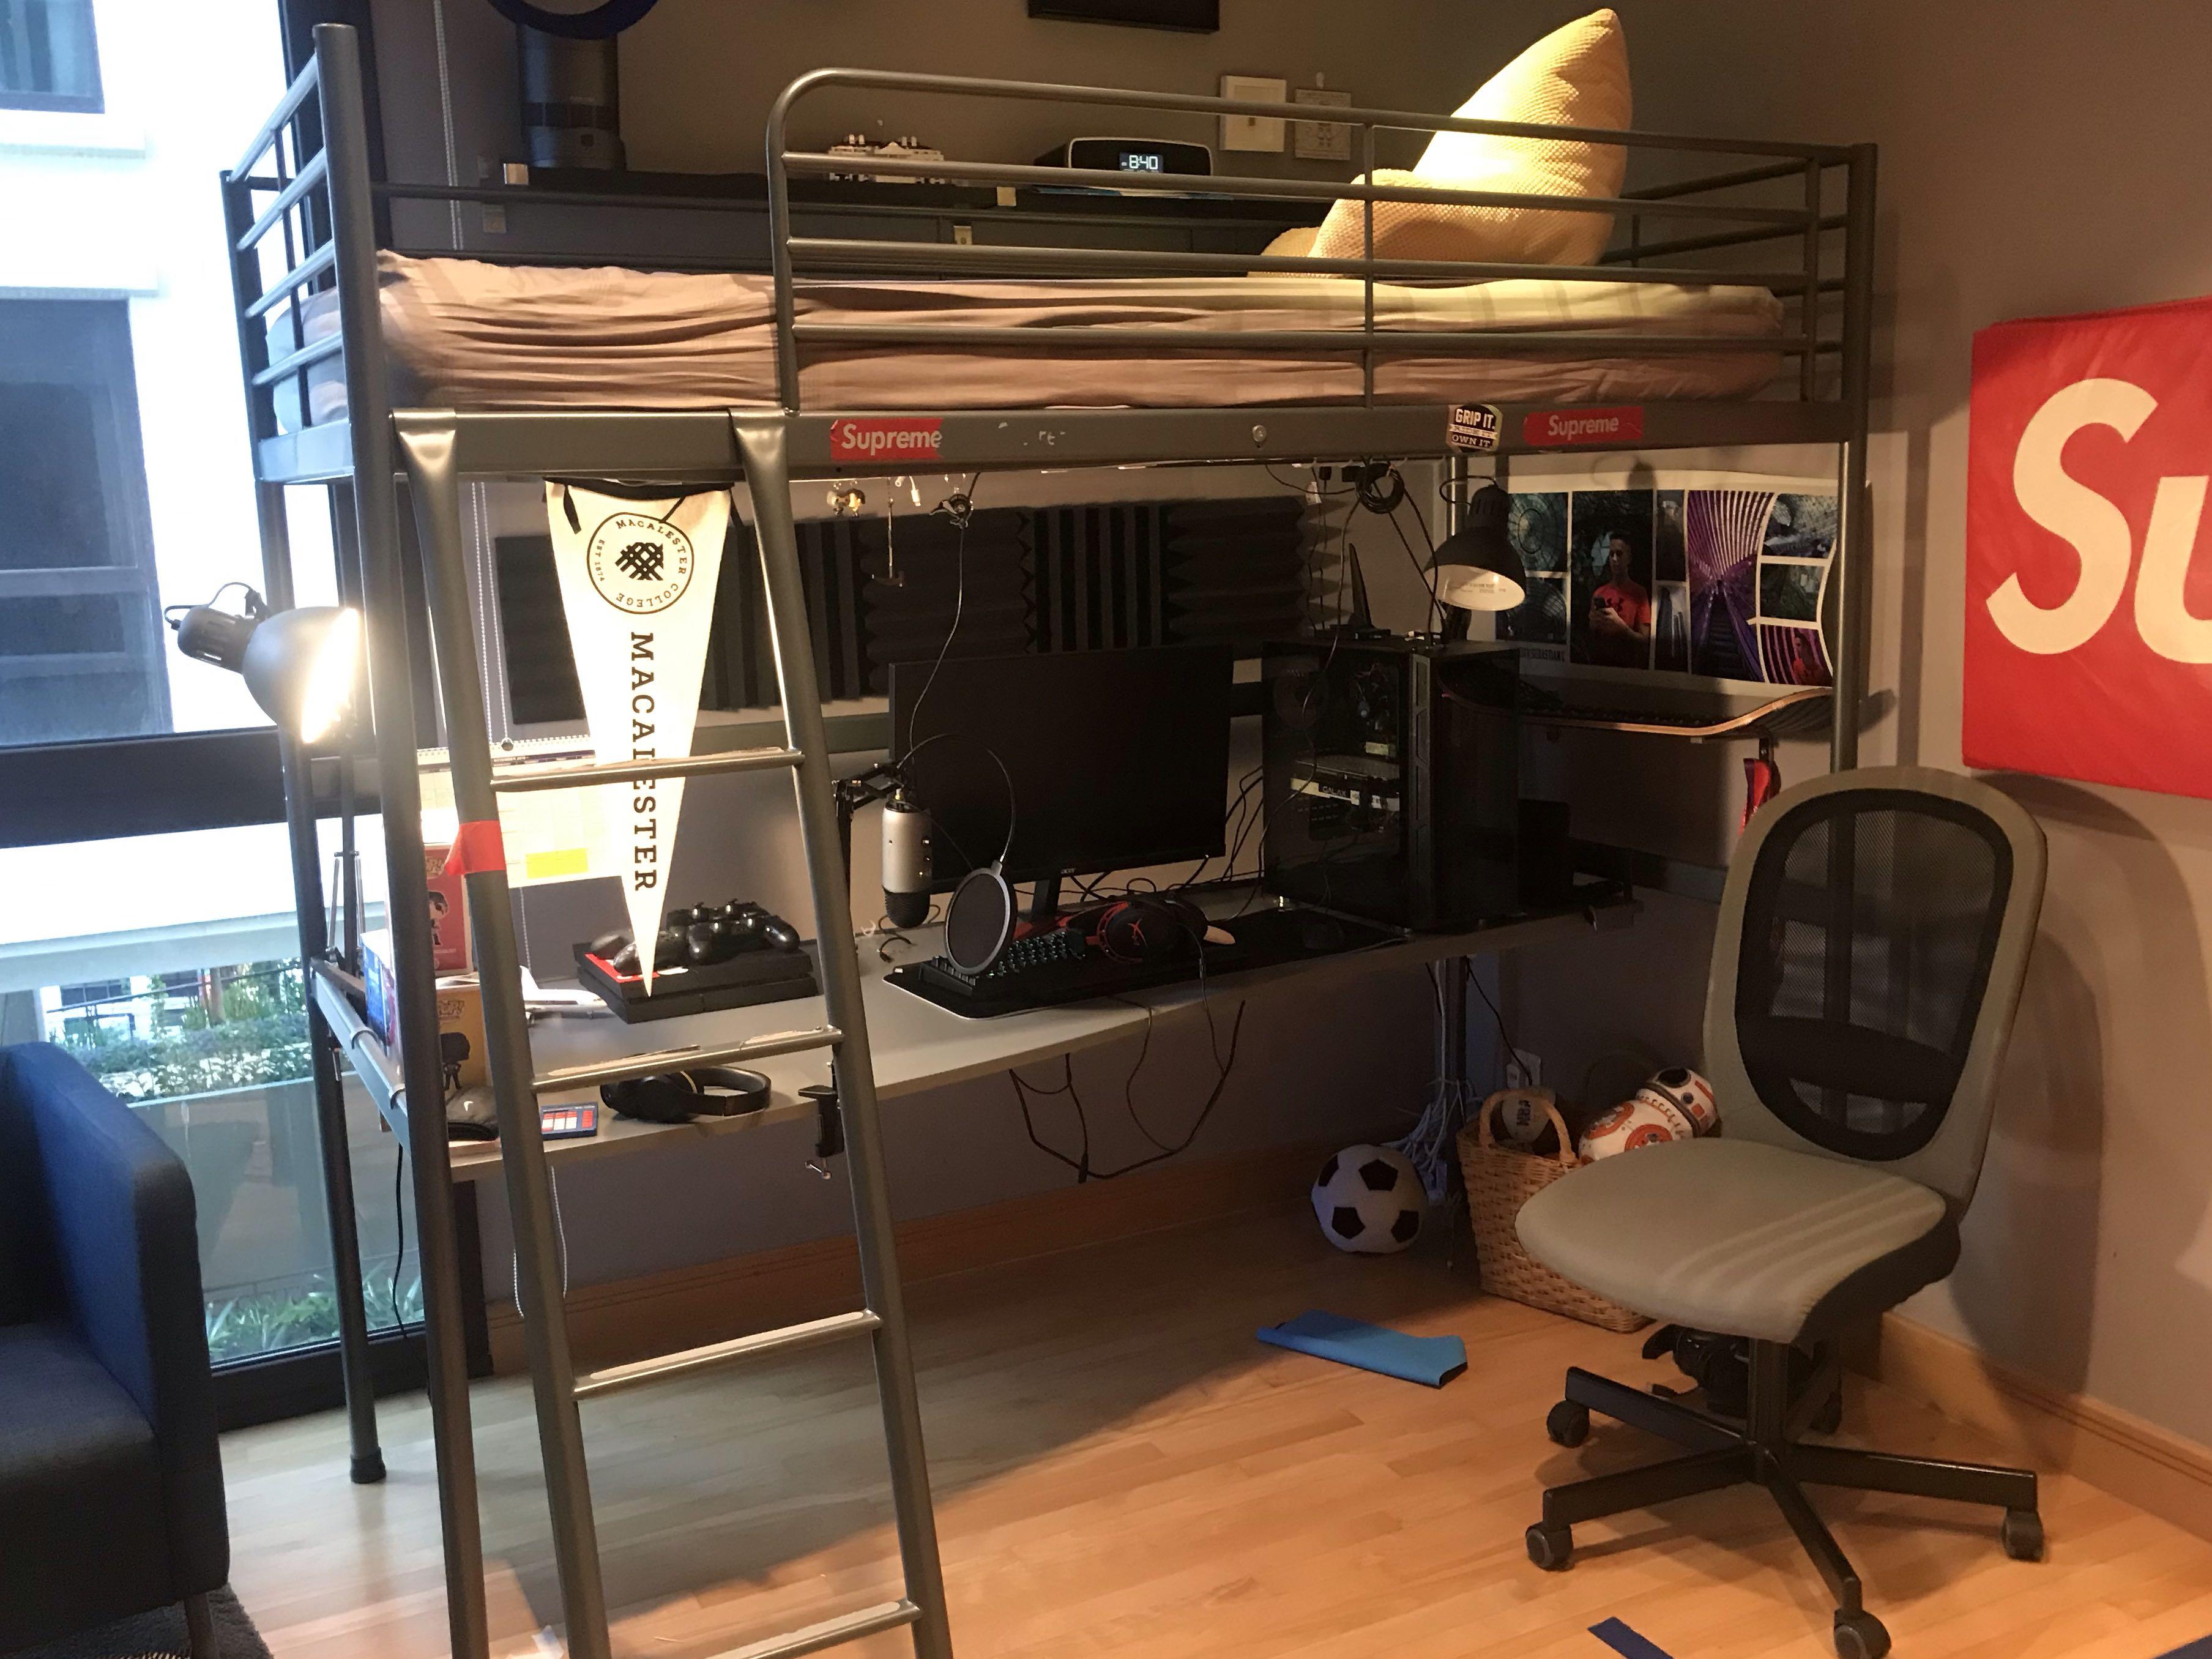 Ikea Svarta Loft Bed With Desk Ikea Chair Two In Stock Furniture Beds Mattresses On Carousell